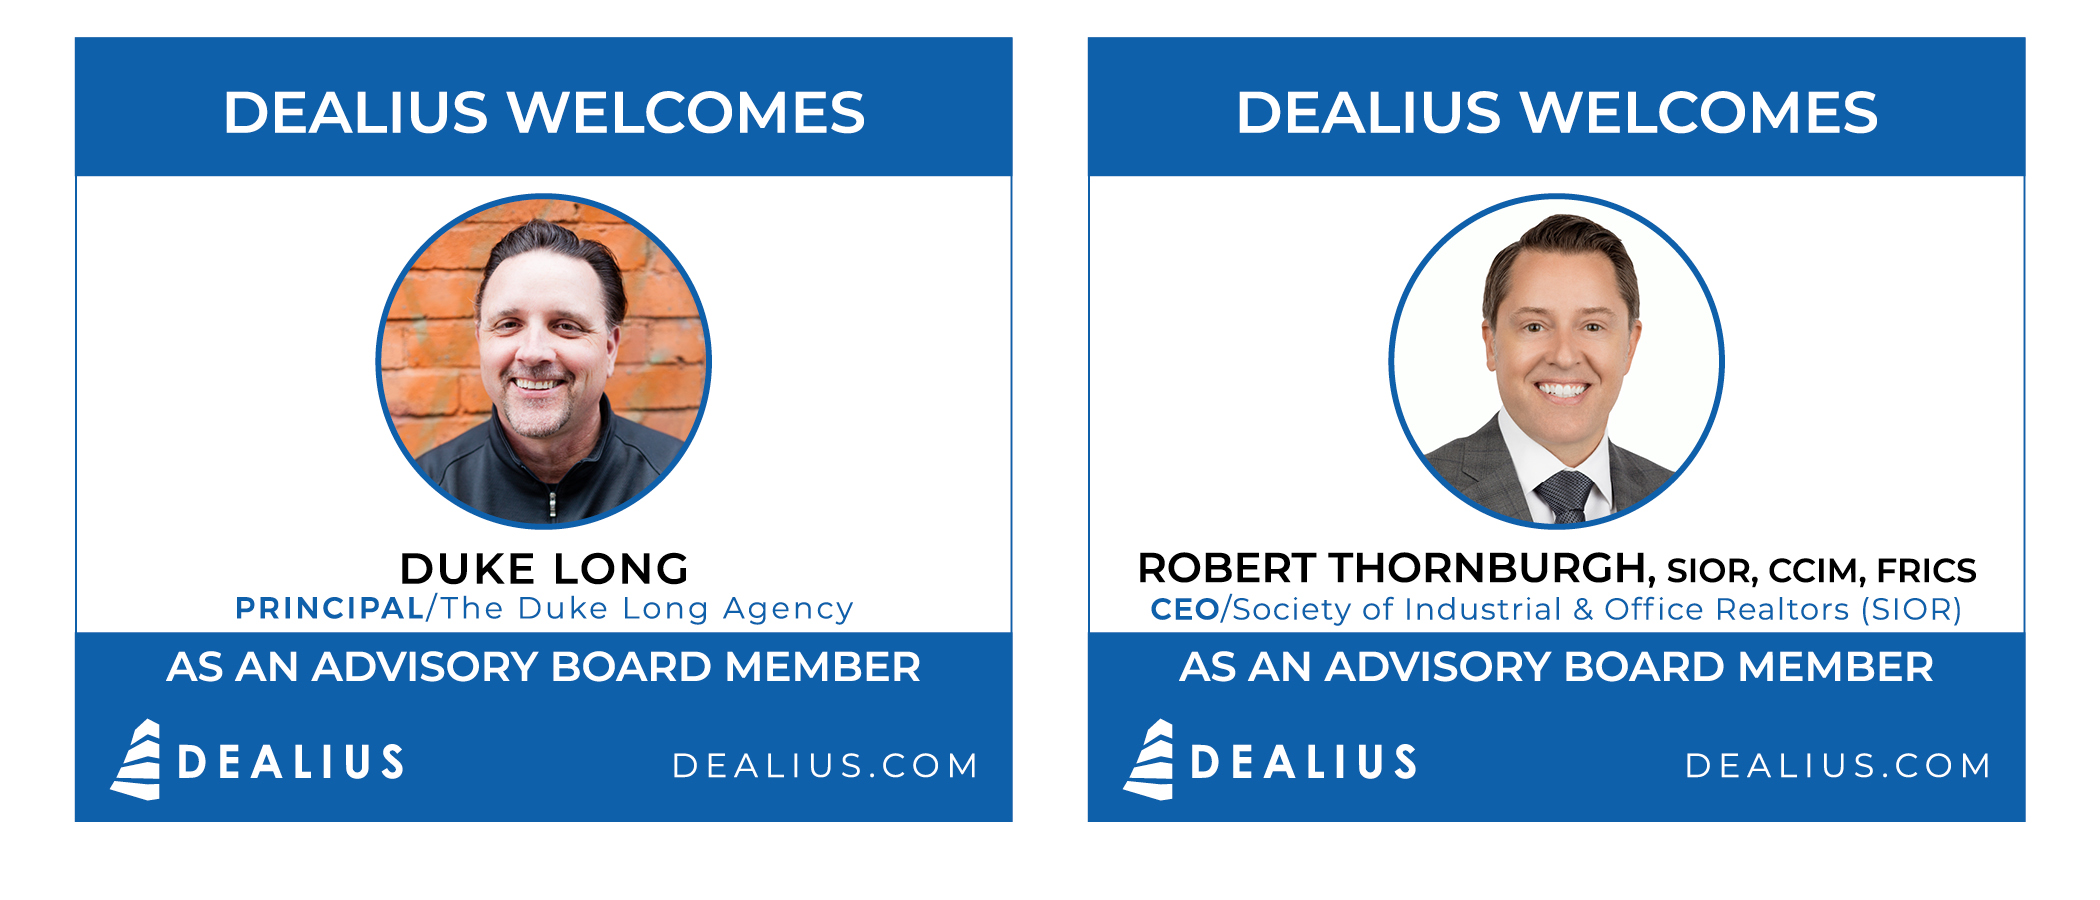 Dealius Welcomes New Members to Its Advisory Board